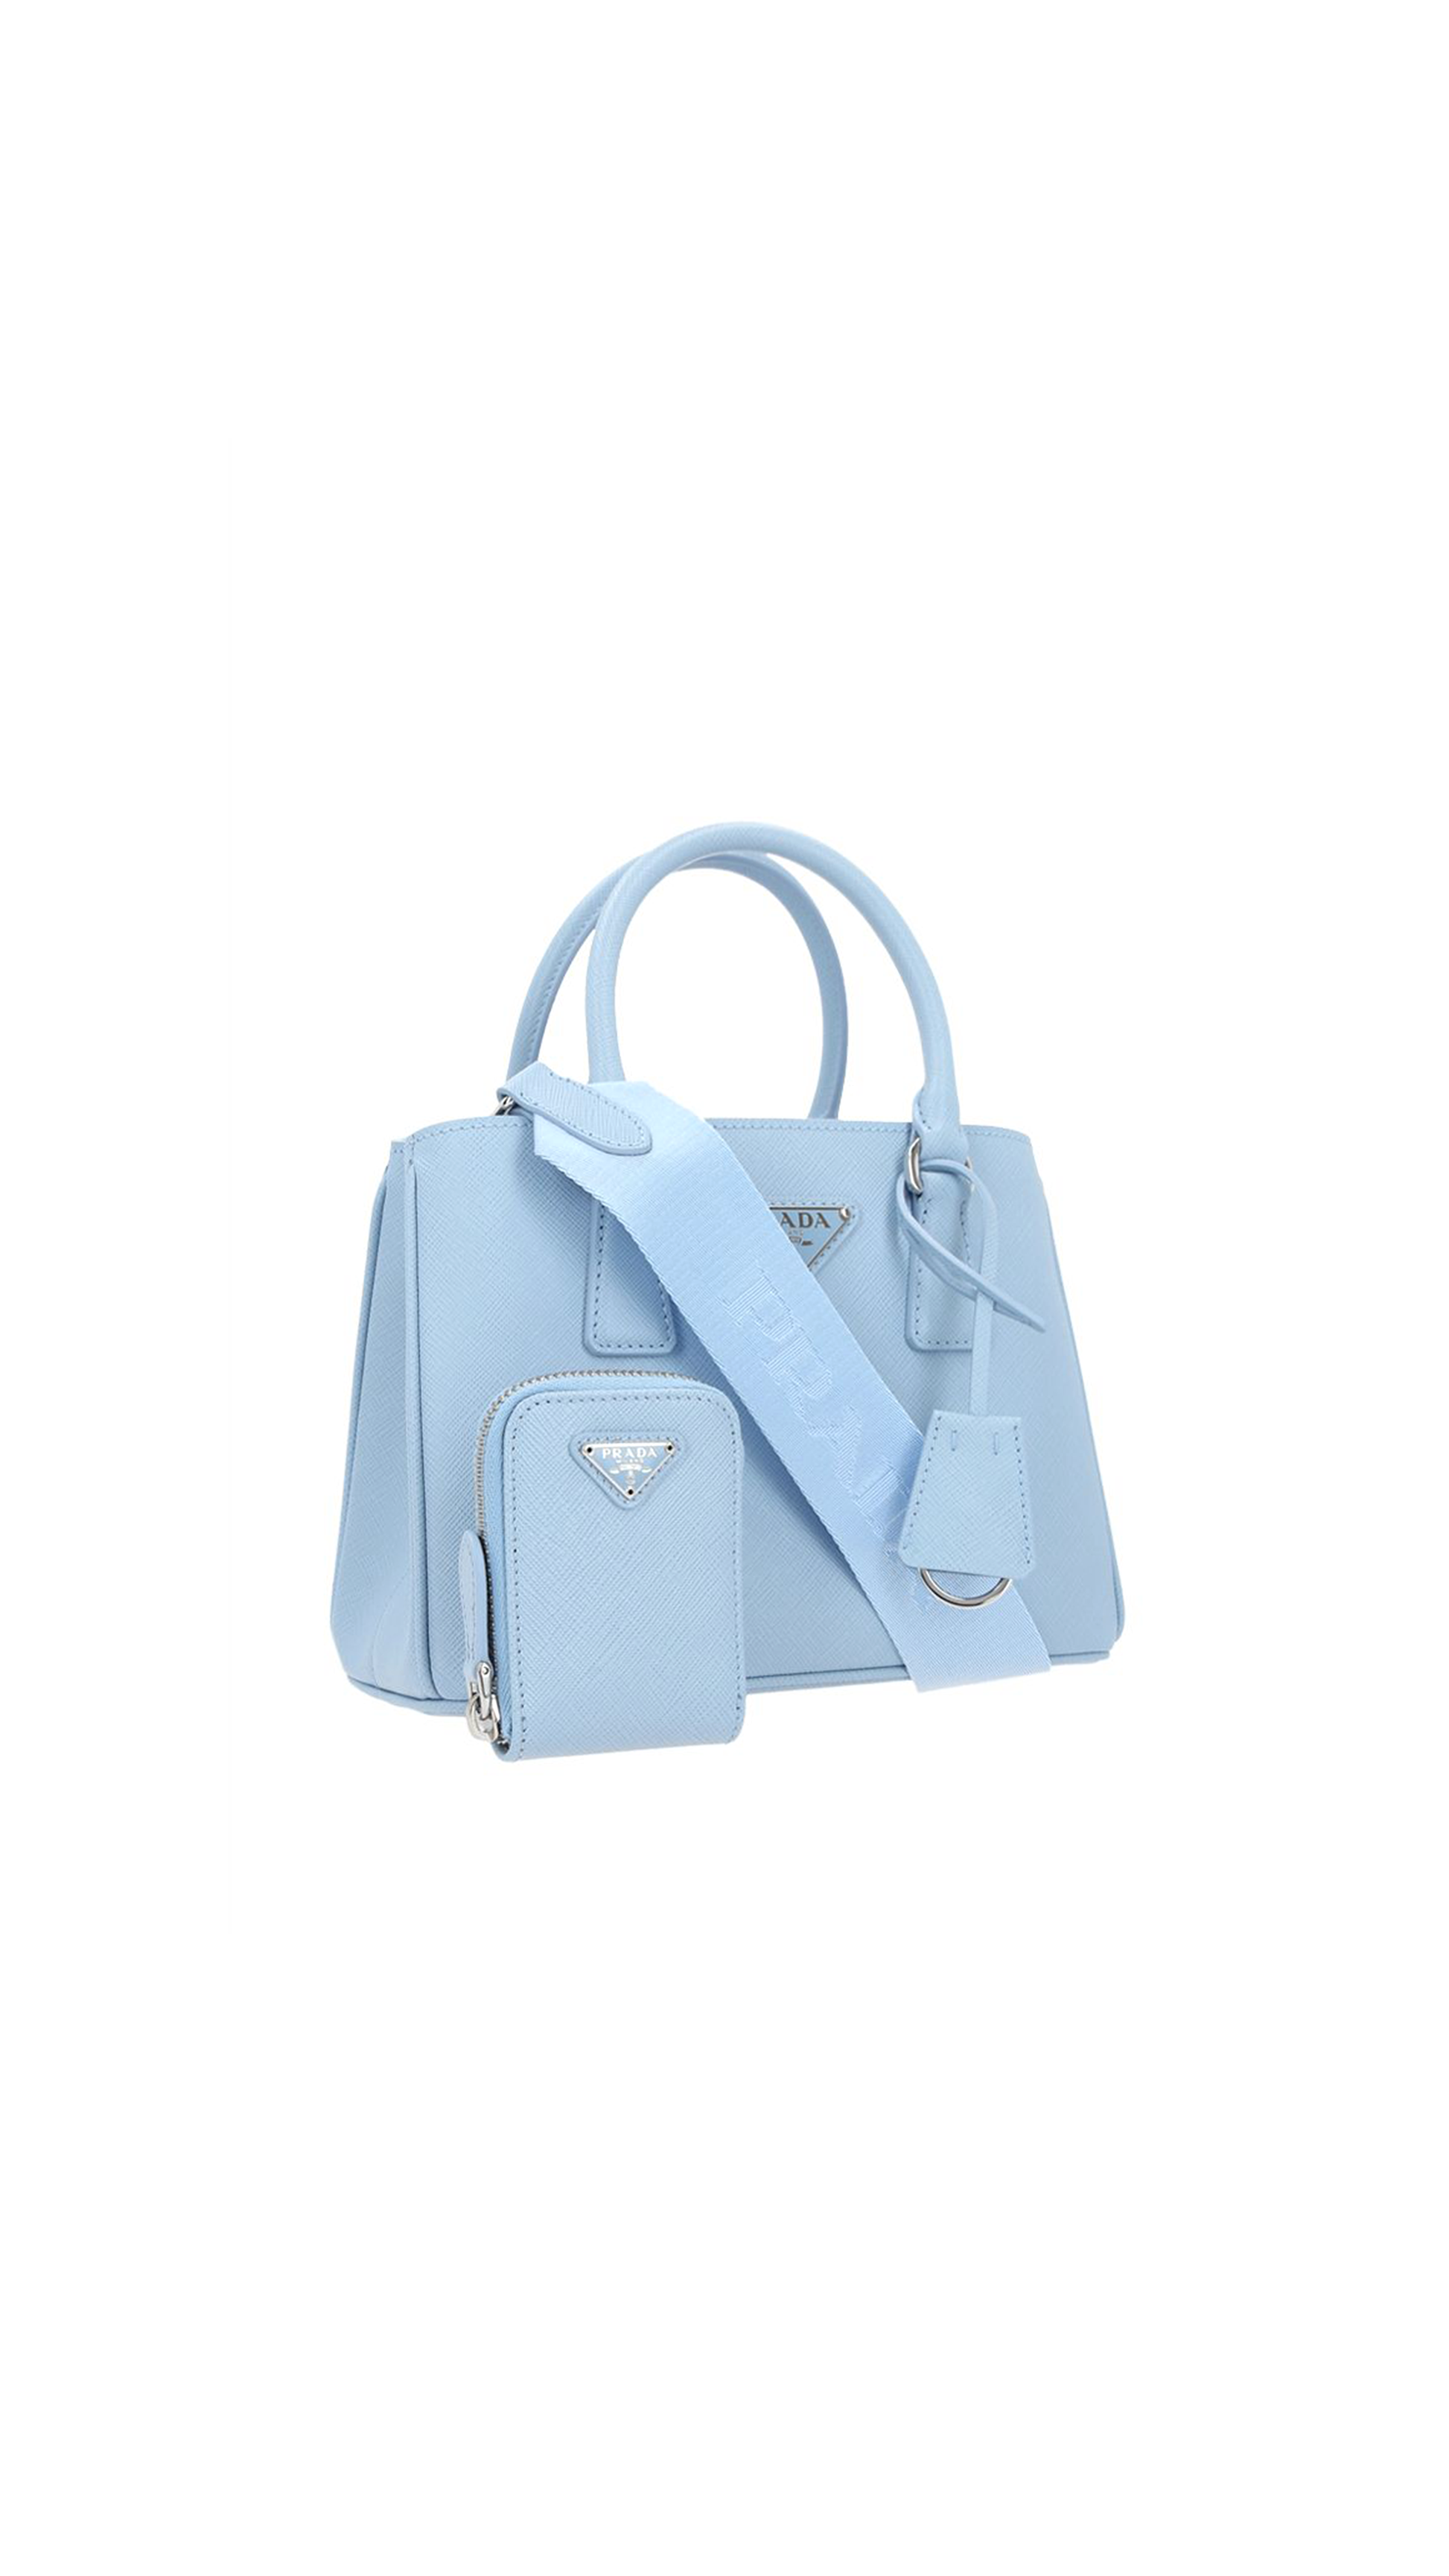 Light blue bag in Saffiano leather